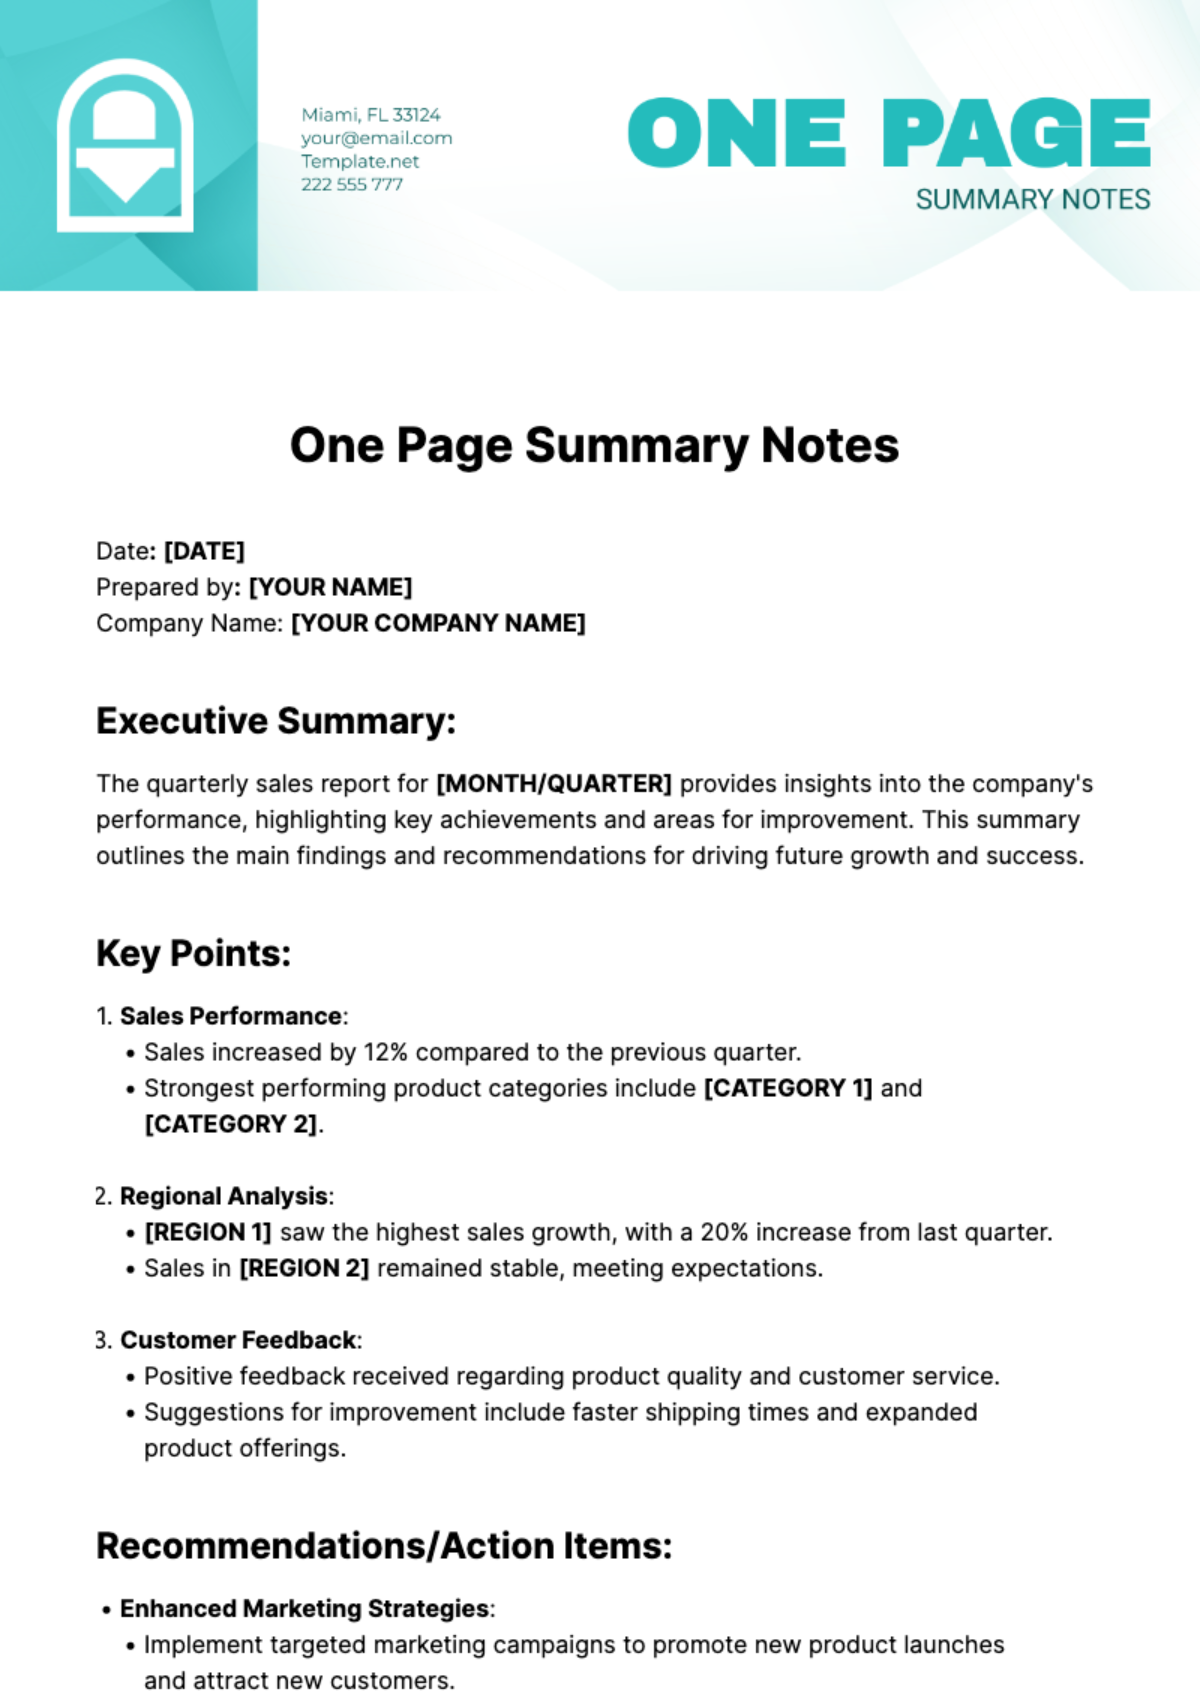 One Page Summary Notes Template